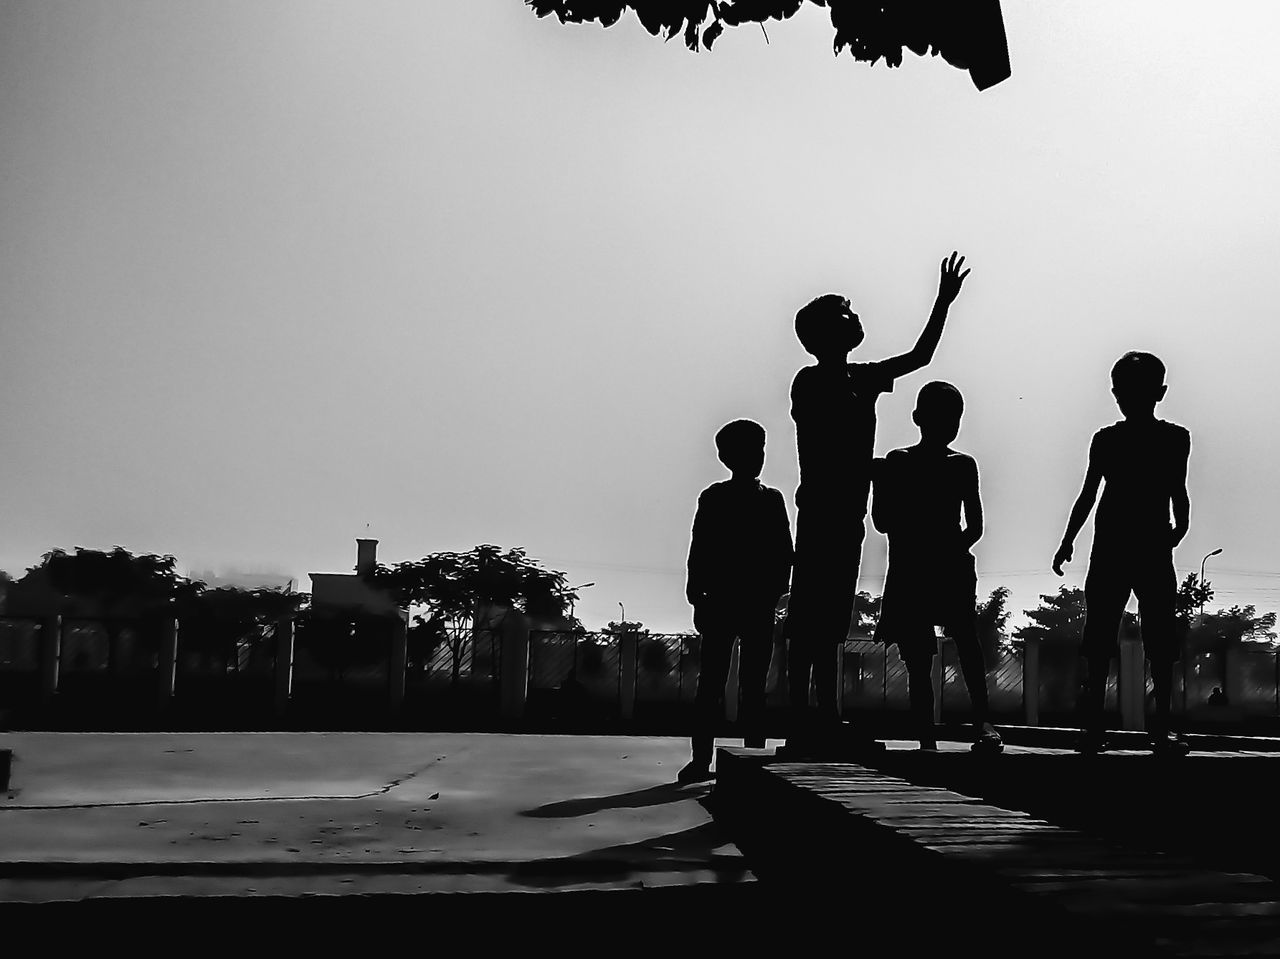 real people, silhouette, clear sky, full length, outdoors, lifestyles, boys, men, sport, tree, sky, large group of people, architecture, building exterior, childhood, friendship, day, city, basketball - sport, people